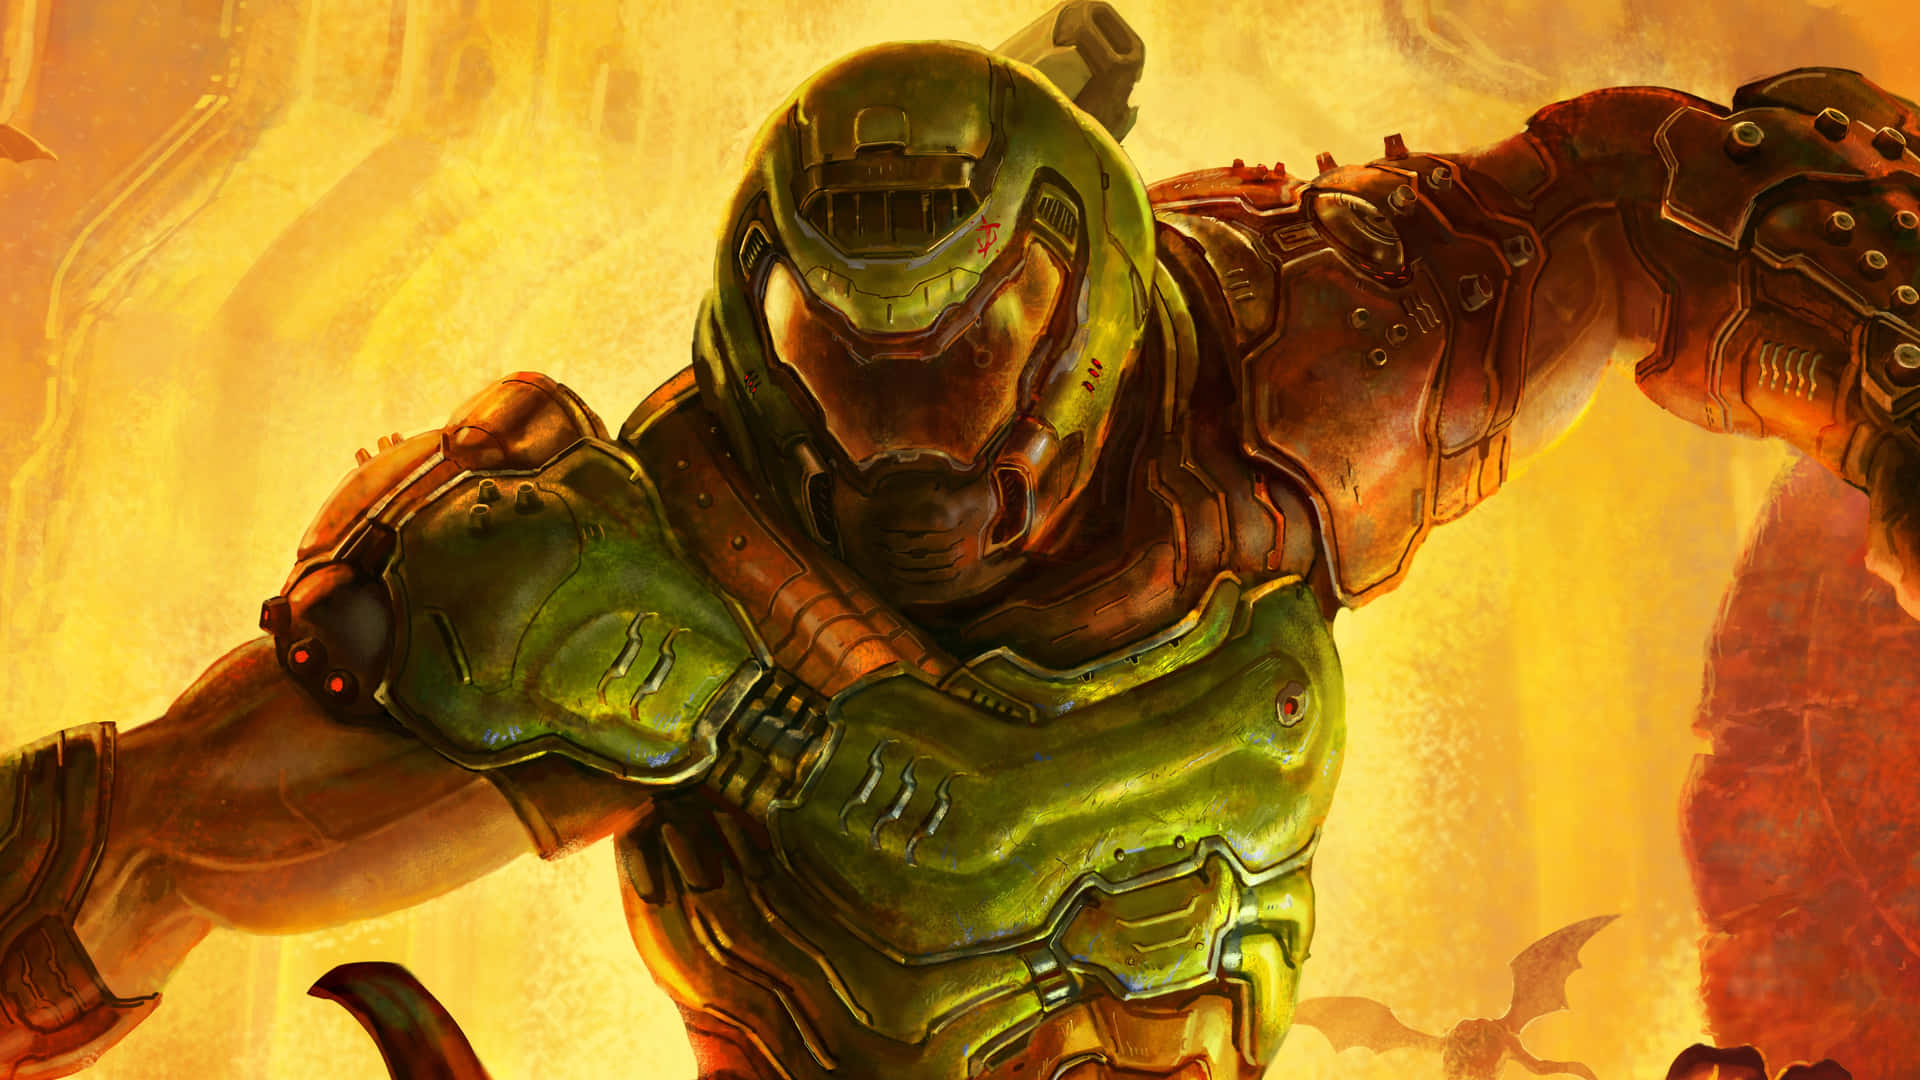 Get Ready to Face the Doom Slayer Wallpaper